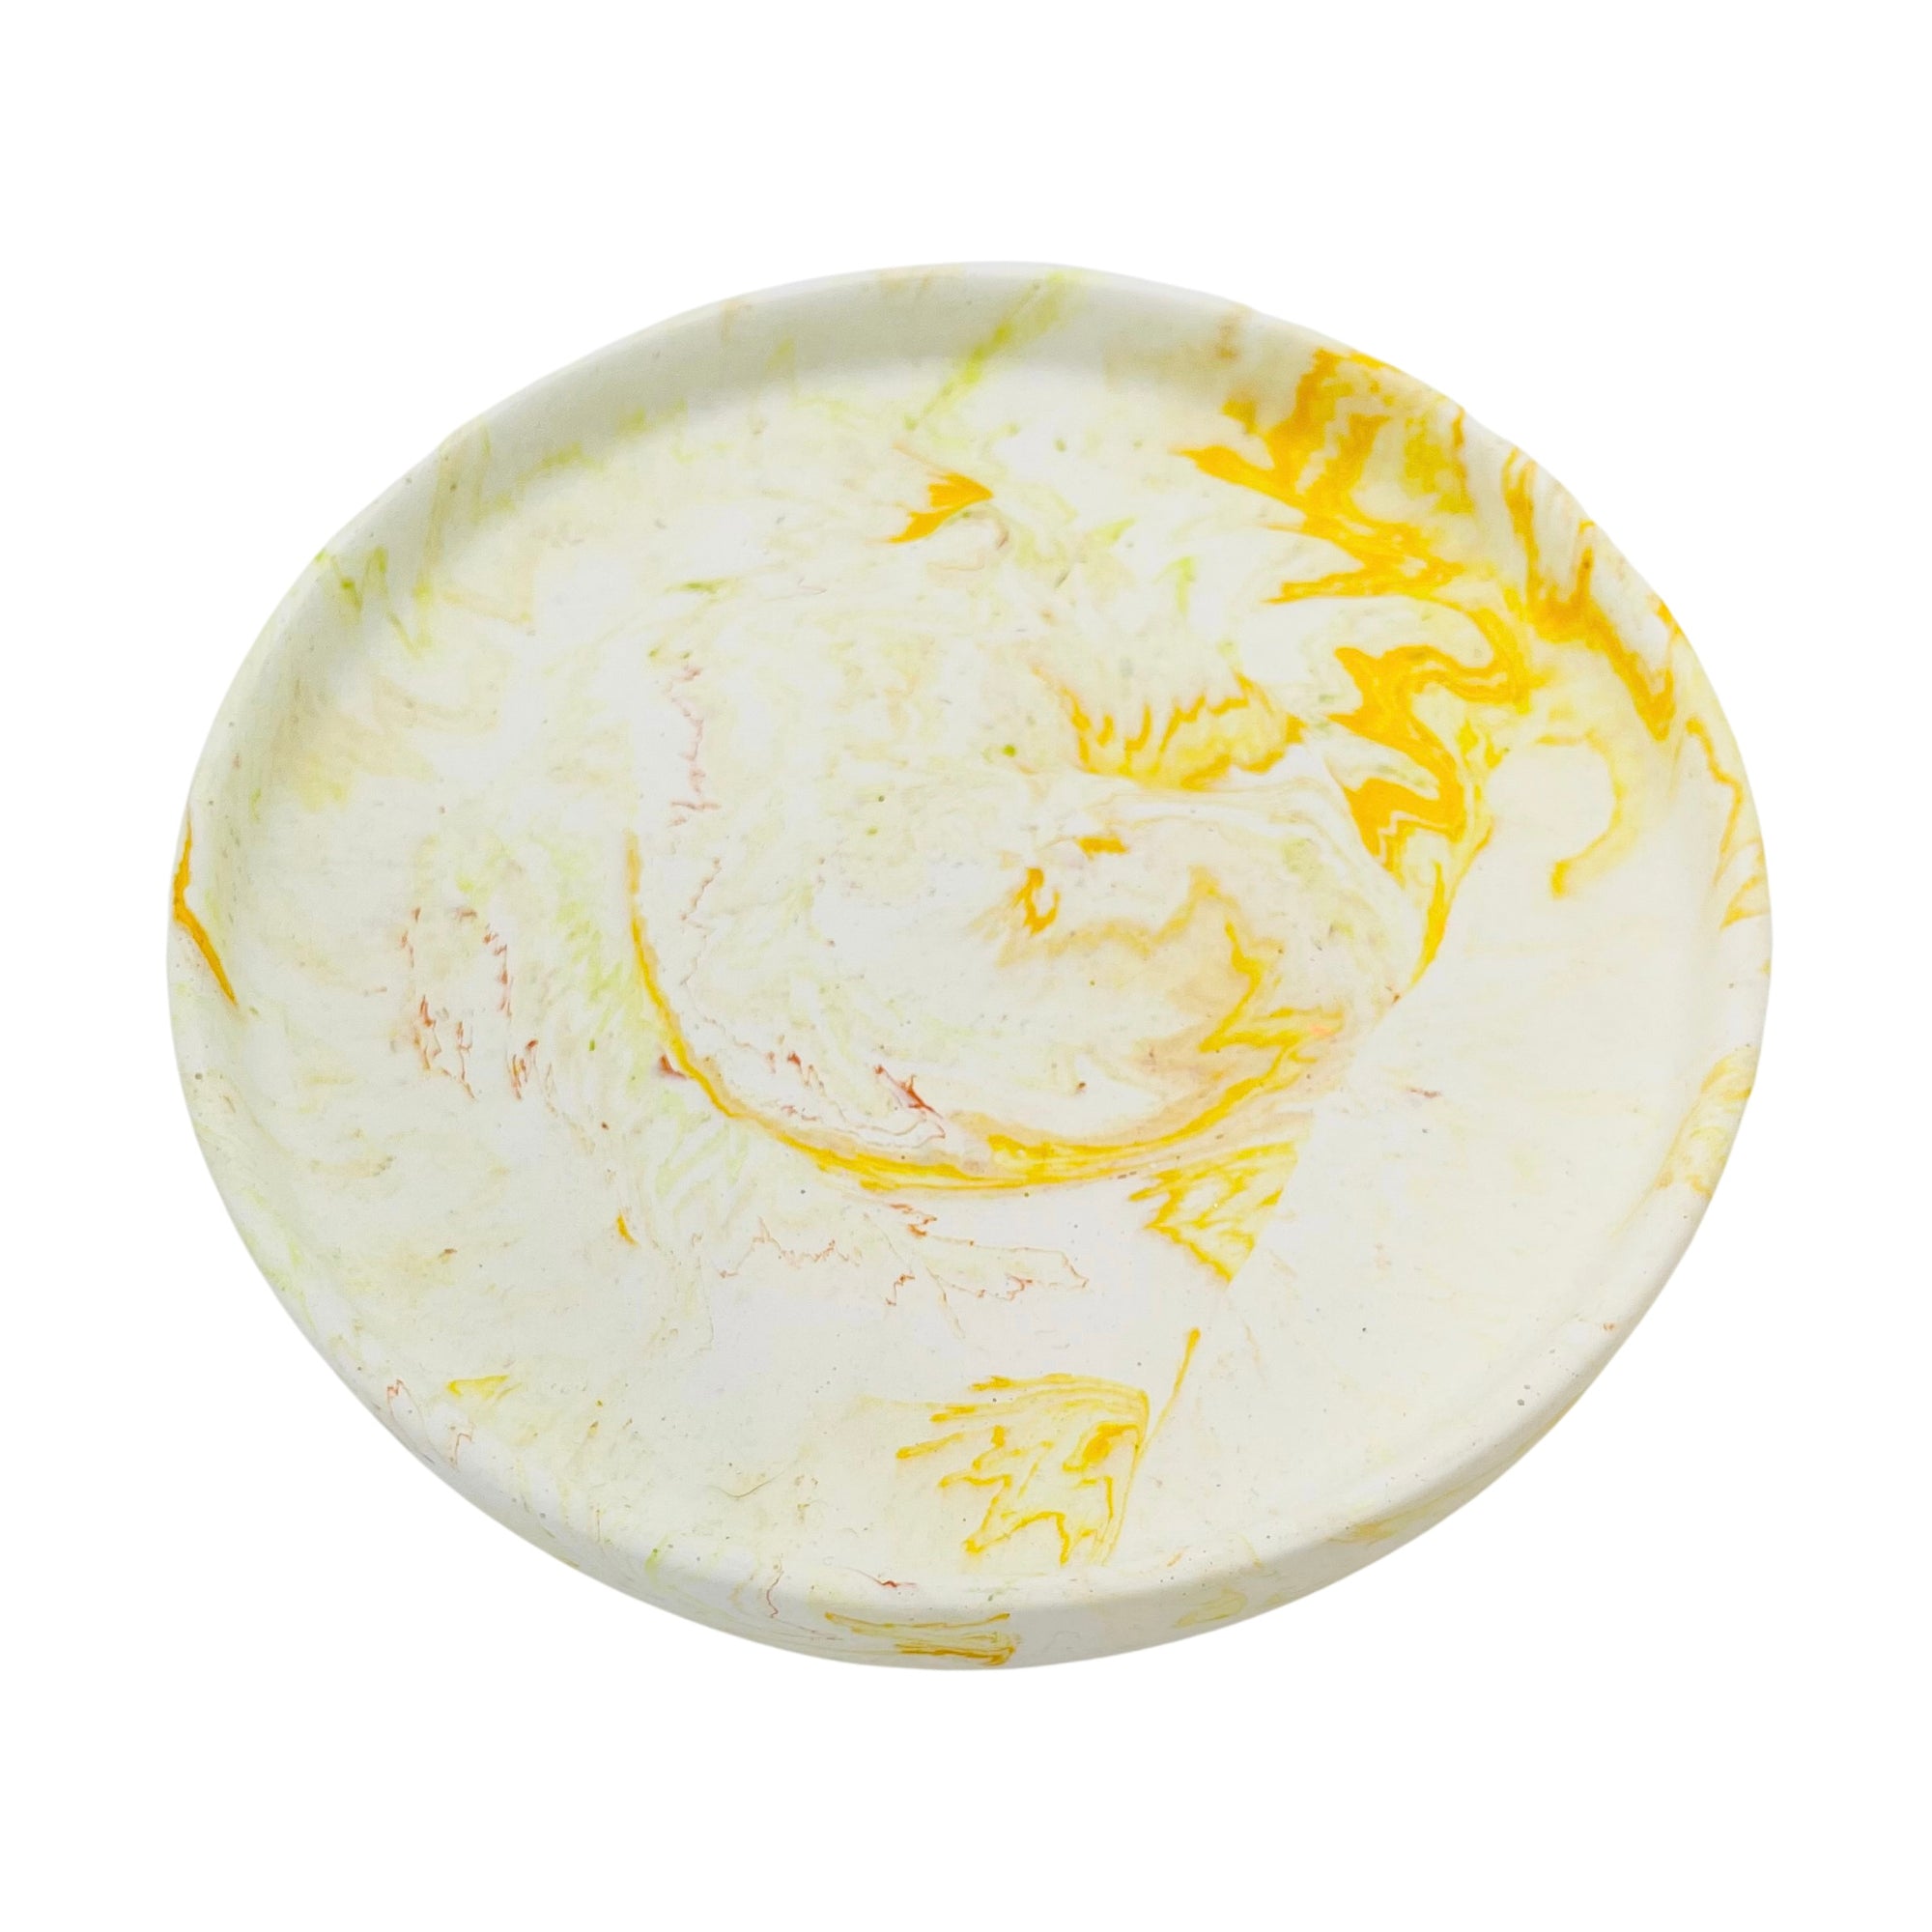 A circular Jesmonite trinket tray measuring 15.4cm in diameter marbled with yellow pigment.